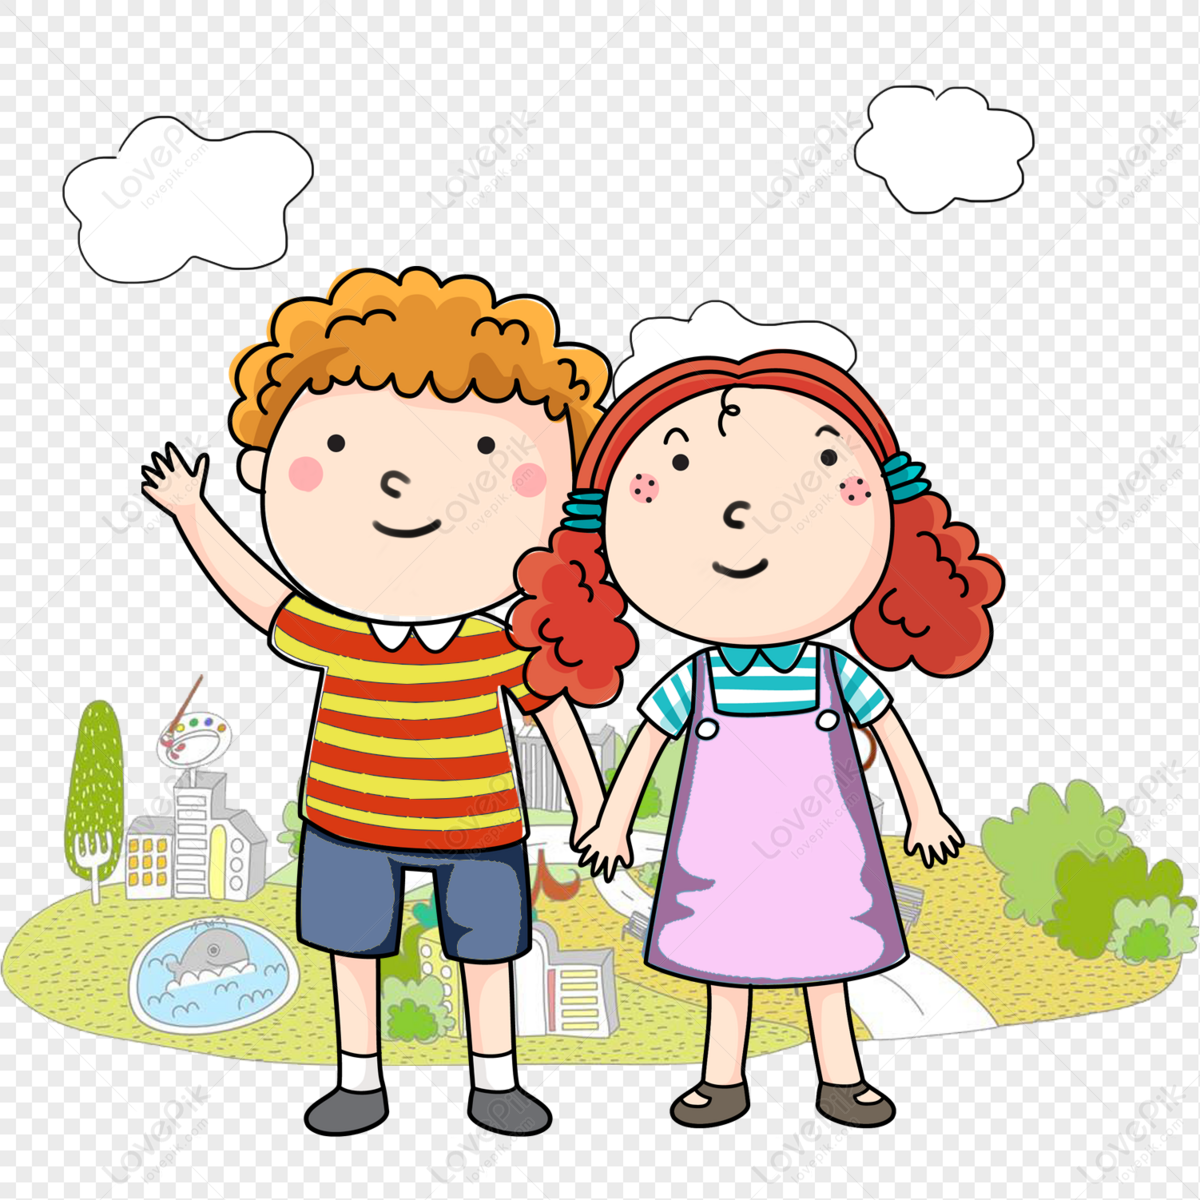 Children Hand In Hand PNG Image Free Download And Clipart Image For Free  Download - Lovepik | 401228981